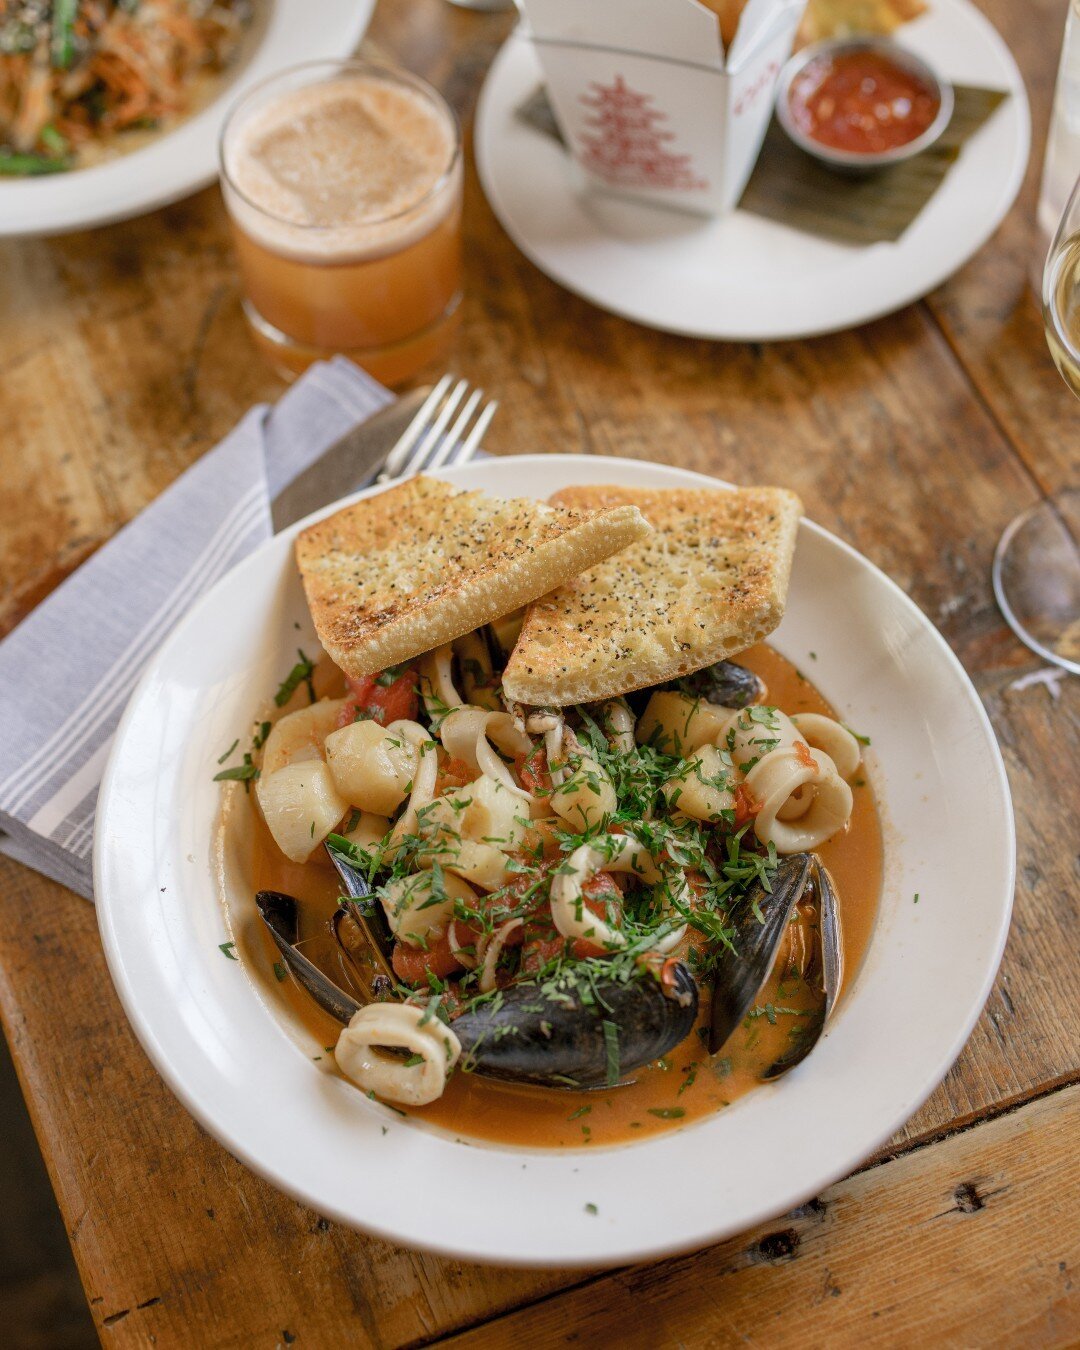 We've got dinner covered tonight with our Cioppino! 

🍽️ Shrimp, Calamari, Mussels, Scallops, tomato broth, crostini. 
.
.
.
#thebarrowhouse #clifton #cliftonnj #northjersey #eatlocal #supportlocal #drinklocal #njbars #barfood #colonial #rustic #far